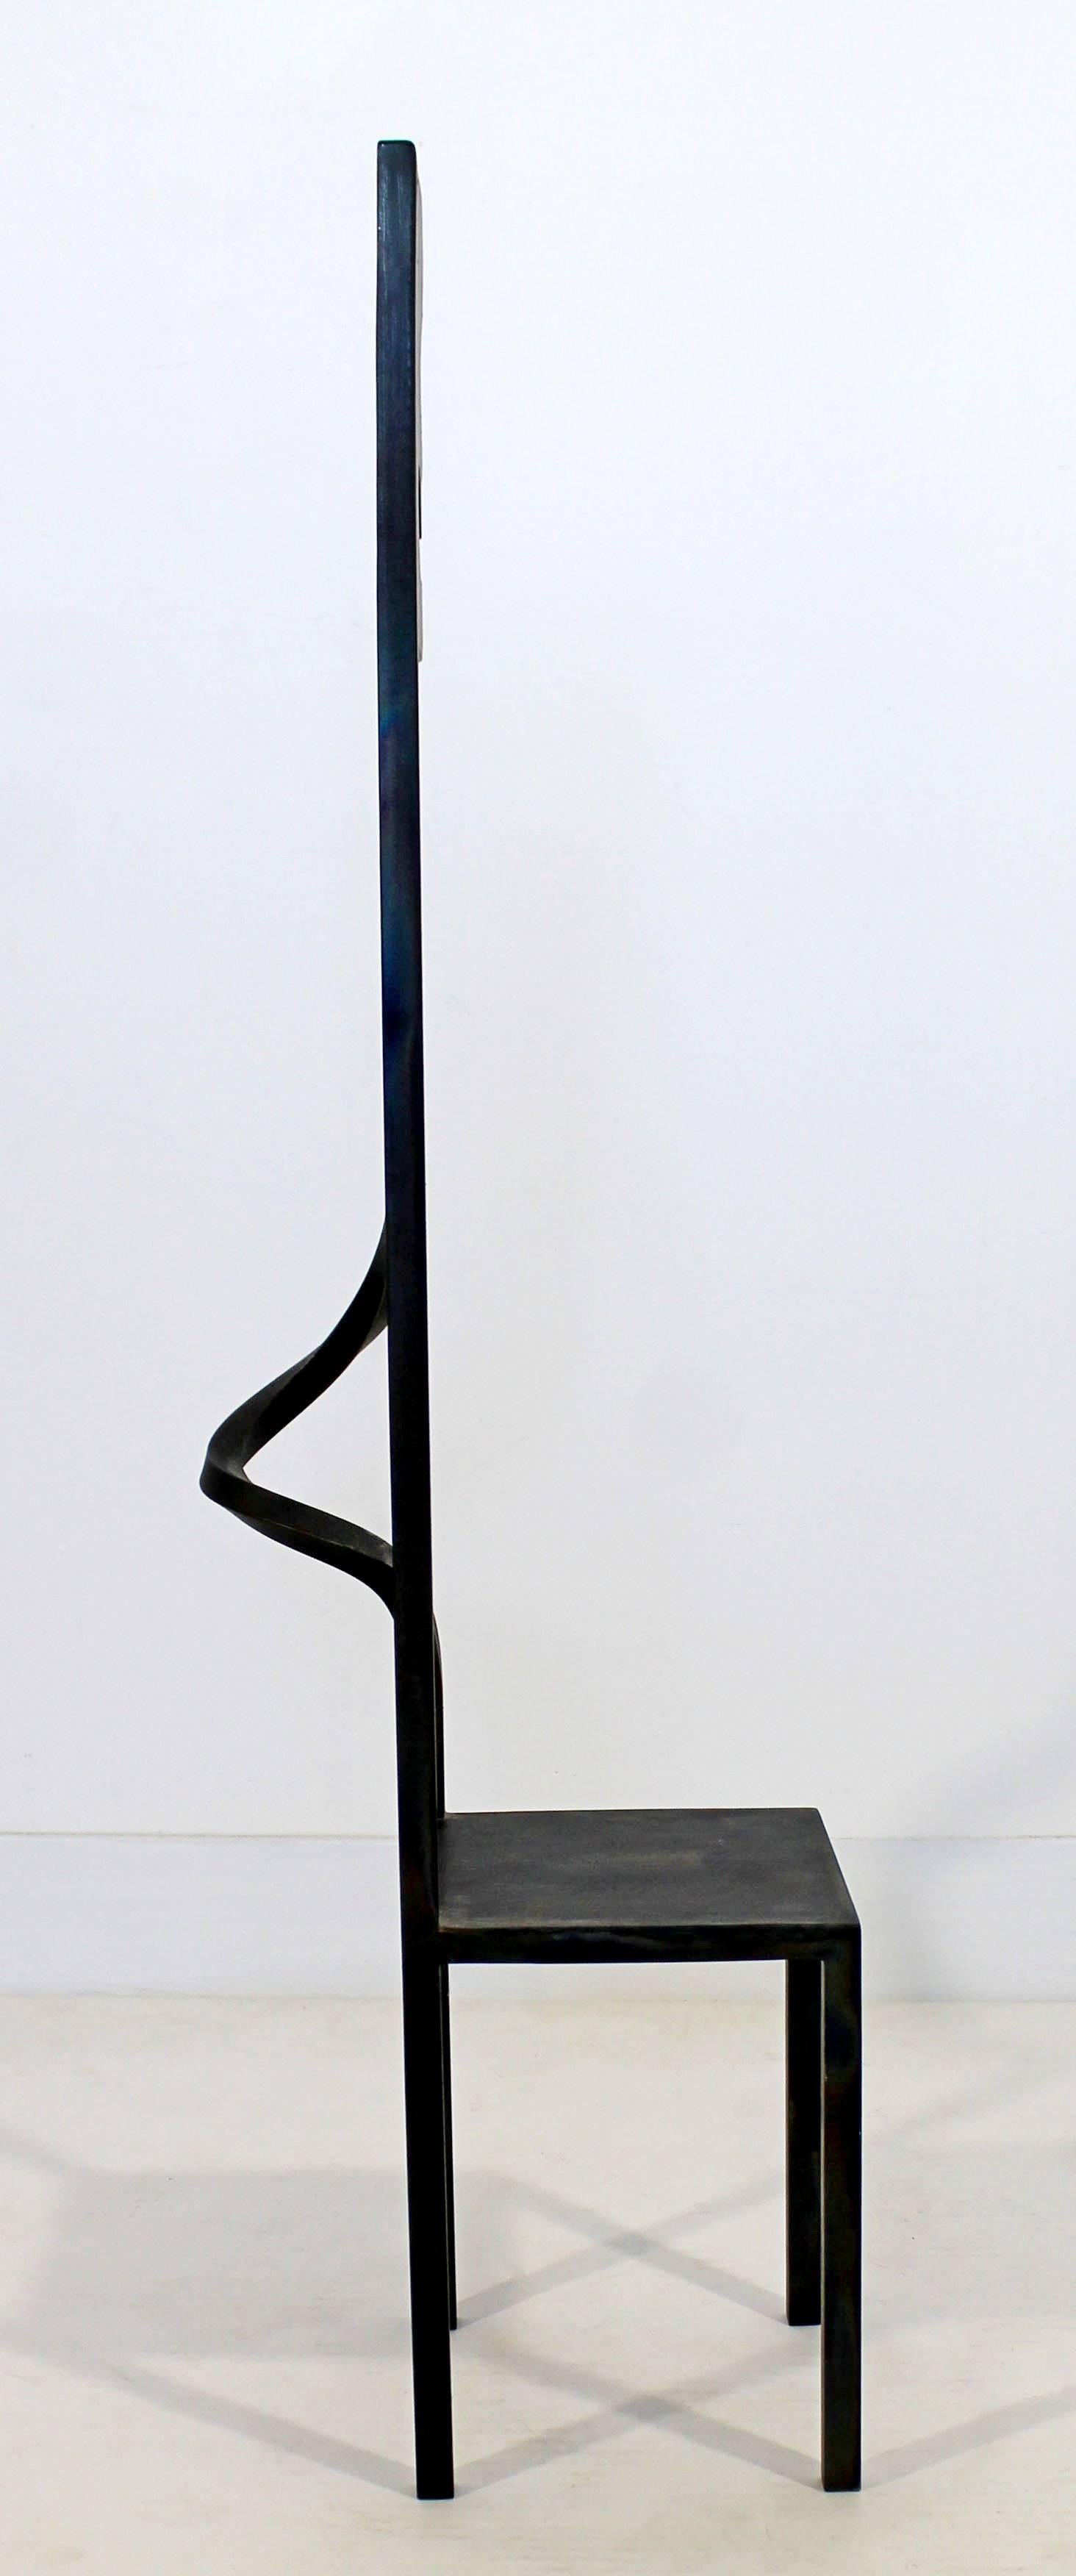 Late 20th Century Contemporary Modern Metal Chair Art Sculpture Signed & Dated by Gary Kulak 1990s